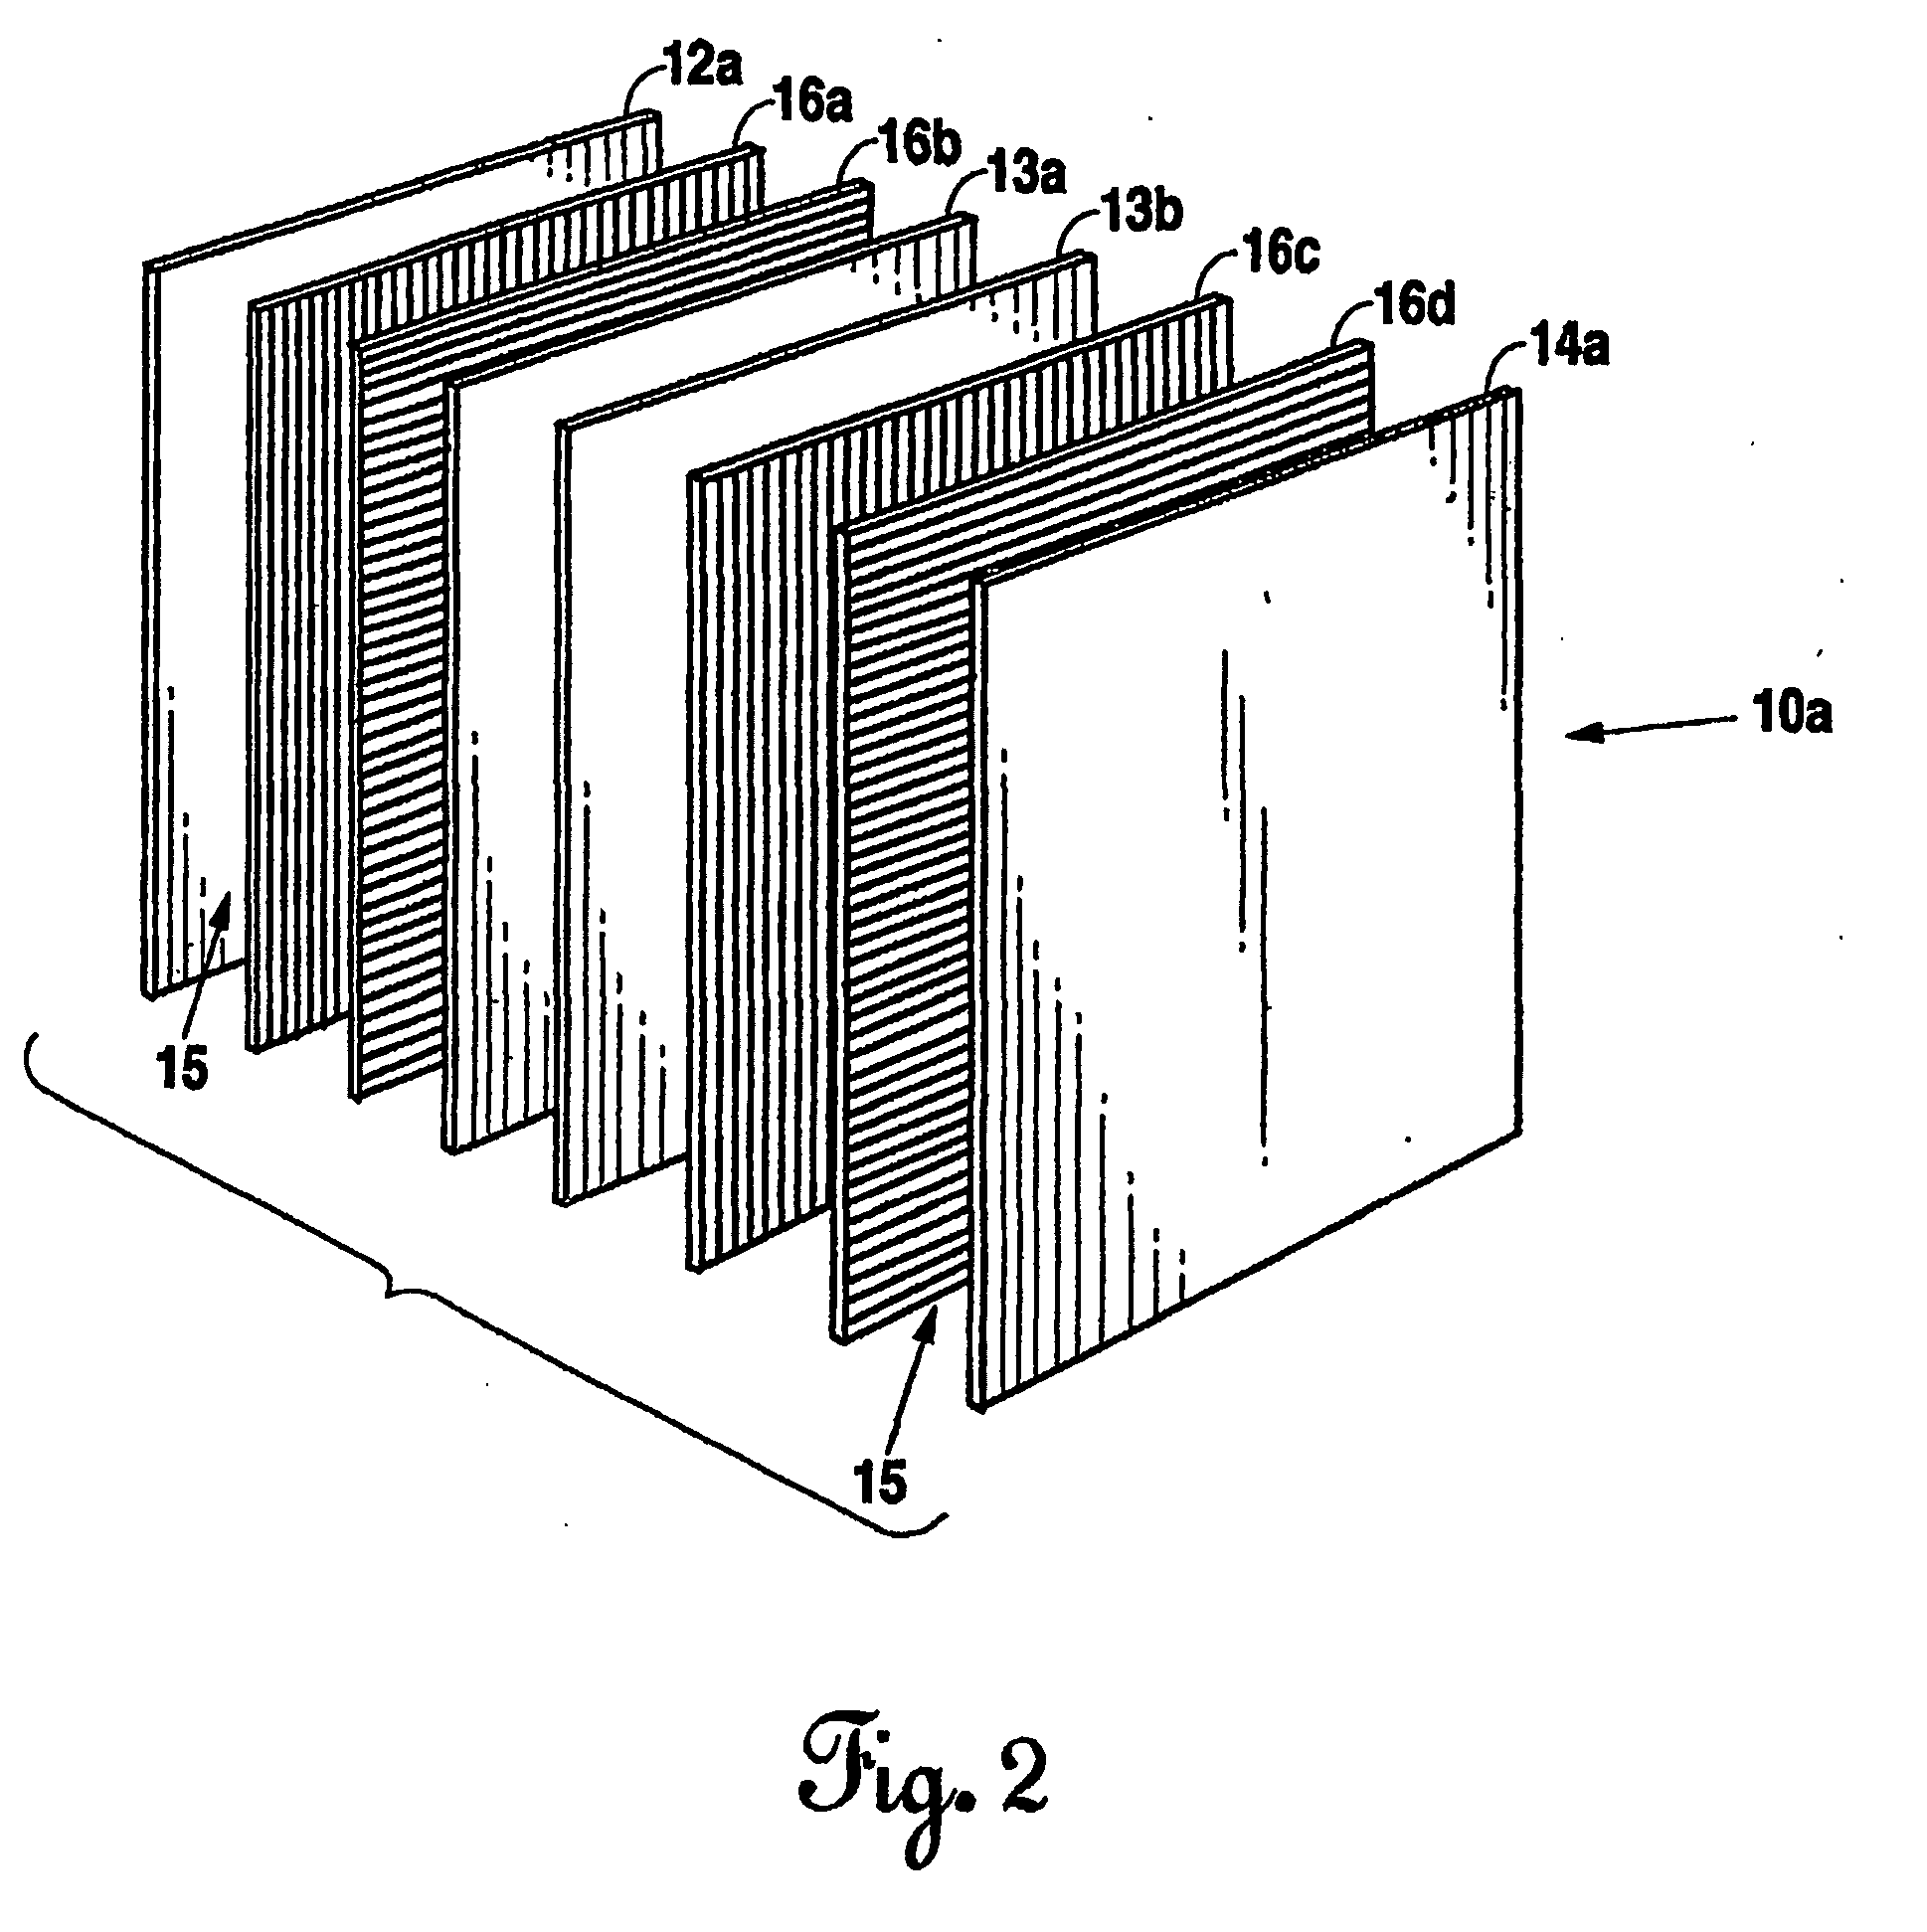 Reinforced paper product and method for making same